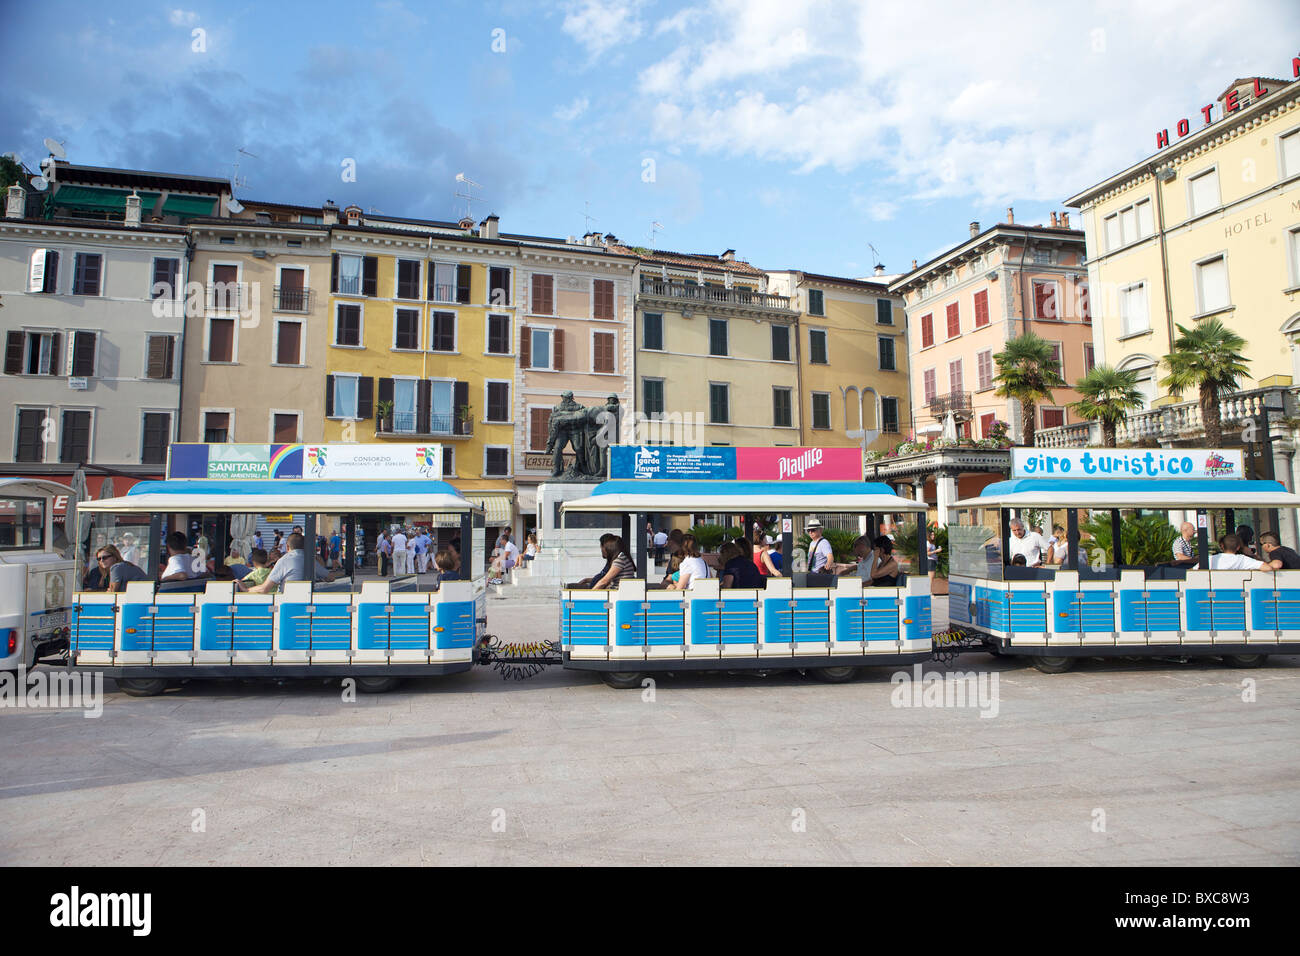 The blue tourist tram or train that shows tourists around the highlights and tourist attractions of Salo, Province of Brescia in Italy Stock Photo